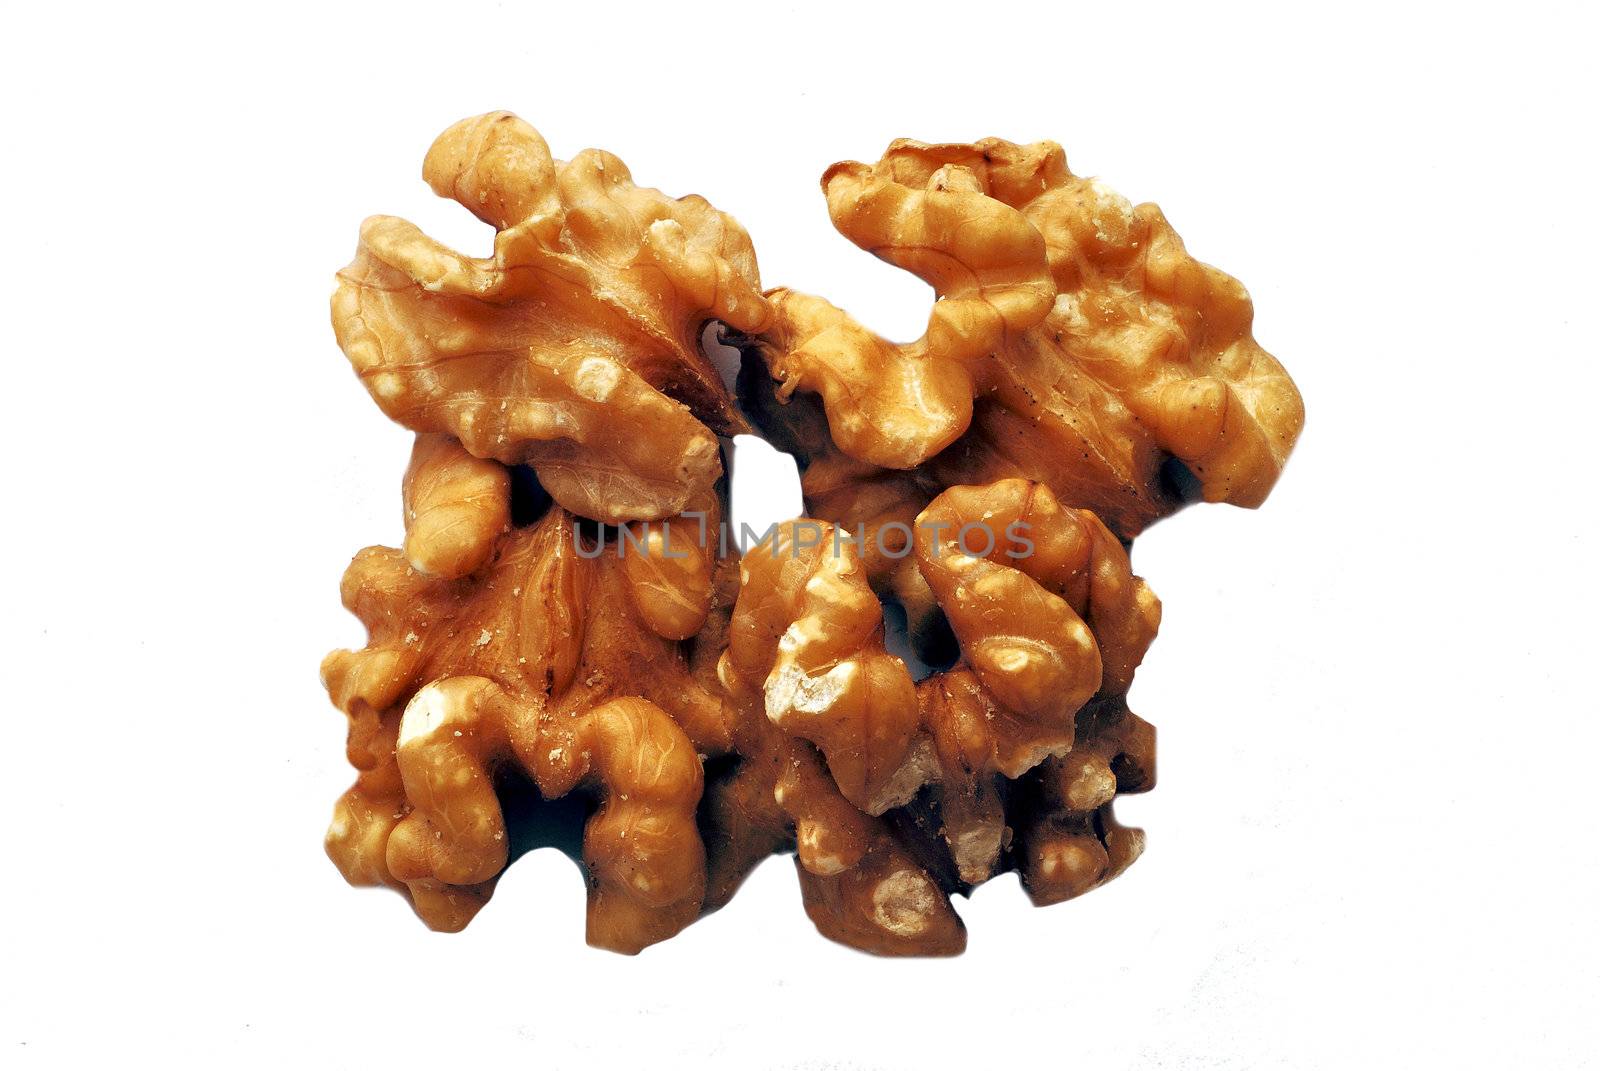 shelled walnuts over white background